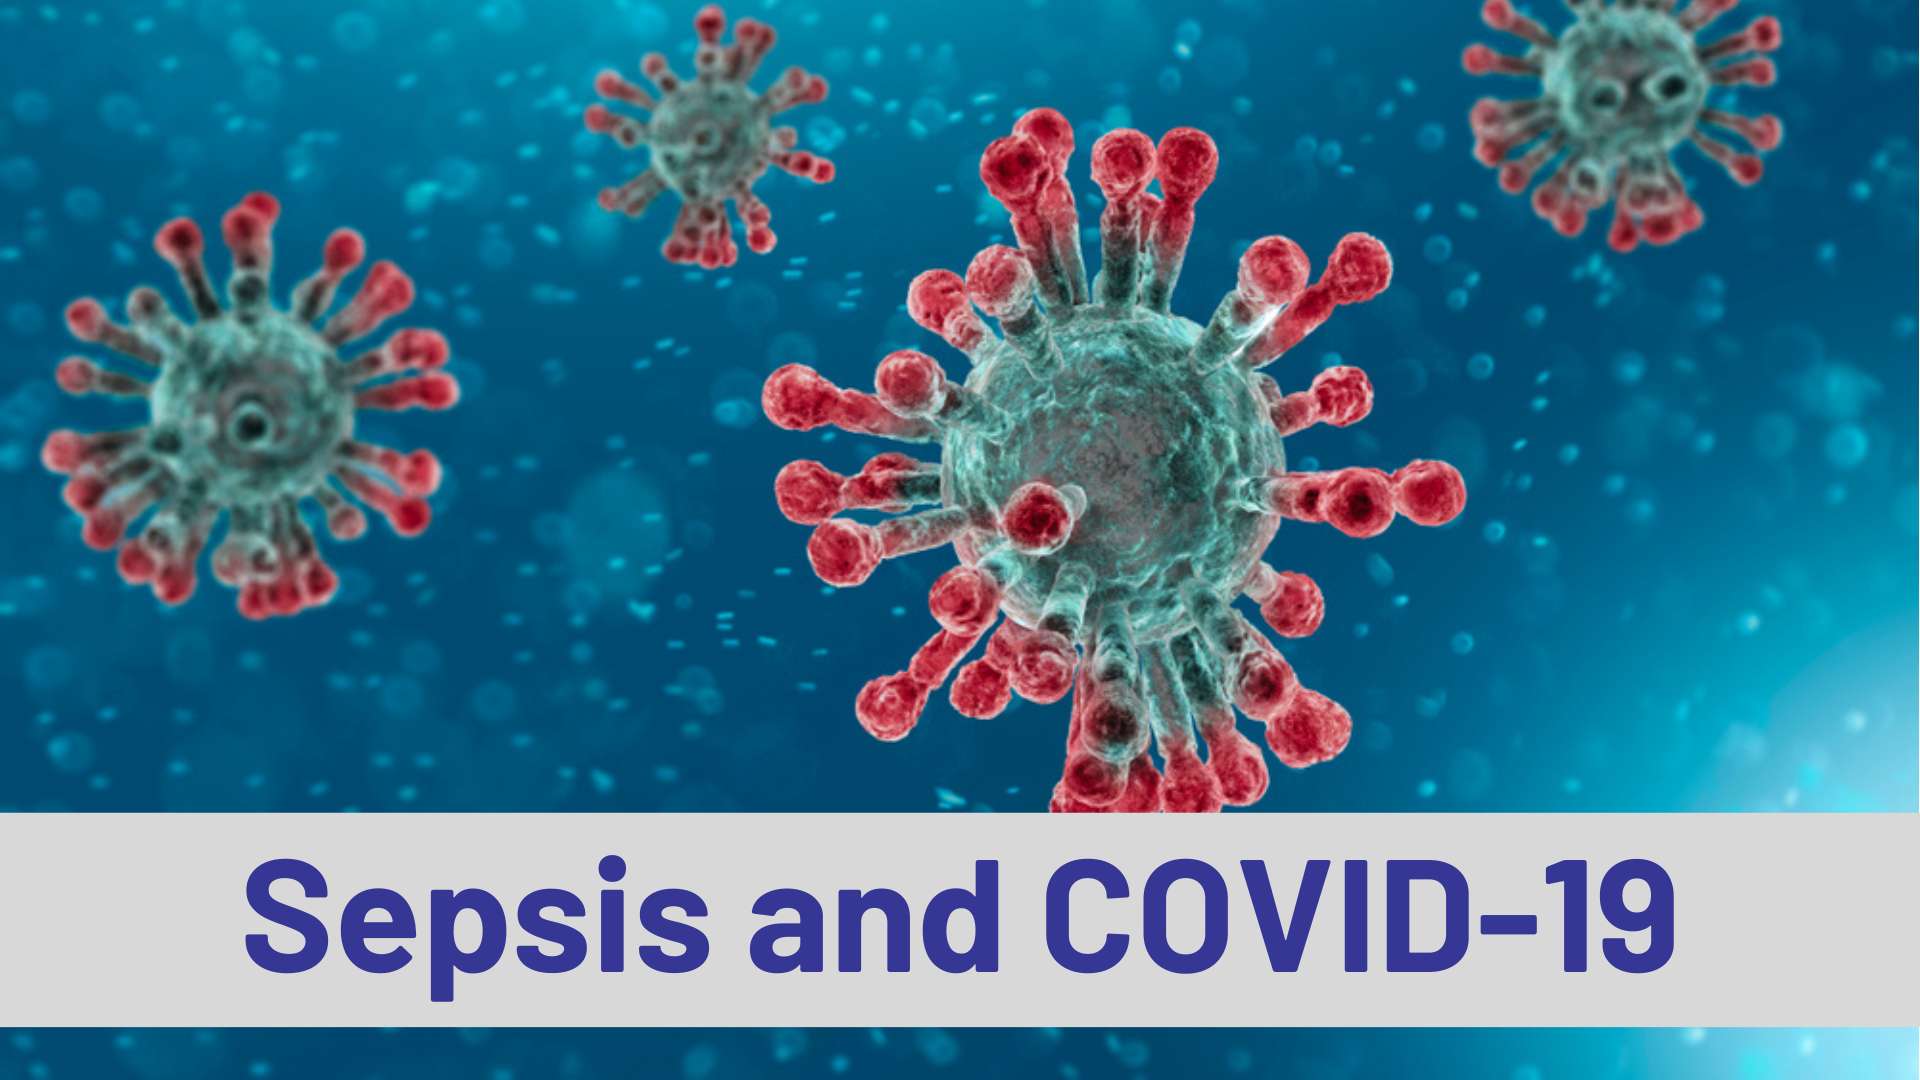 Sepsis and Covid